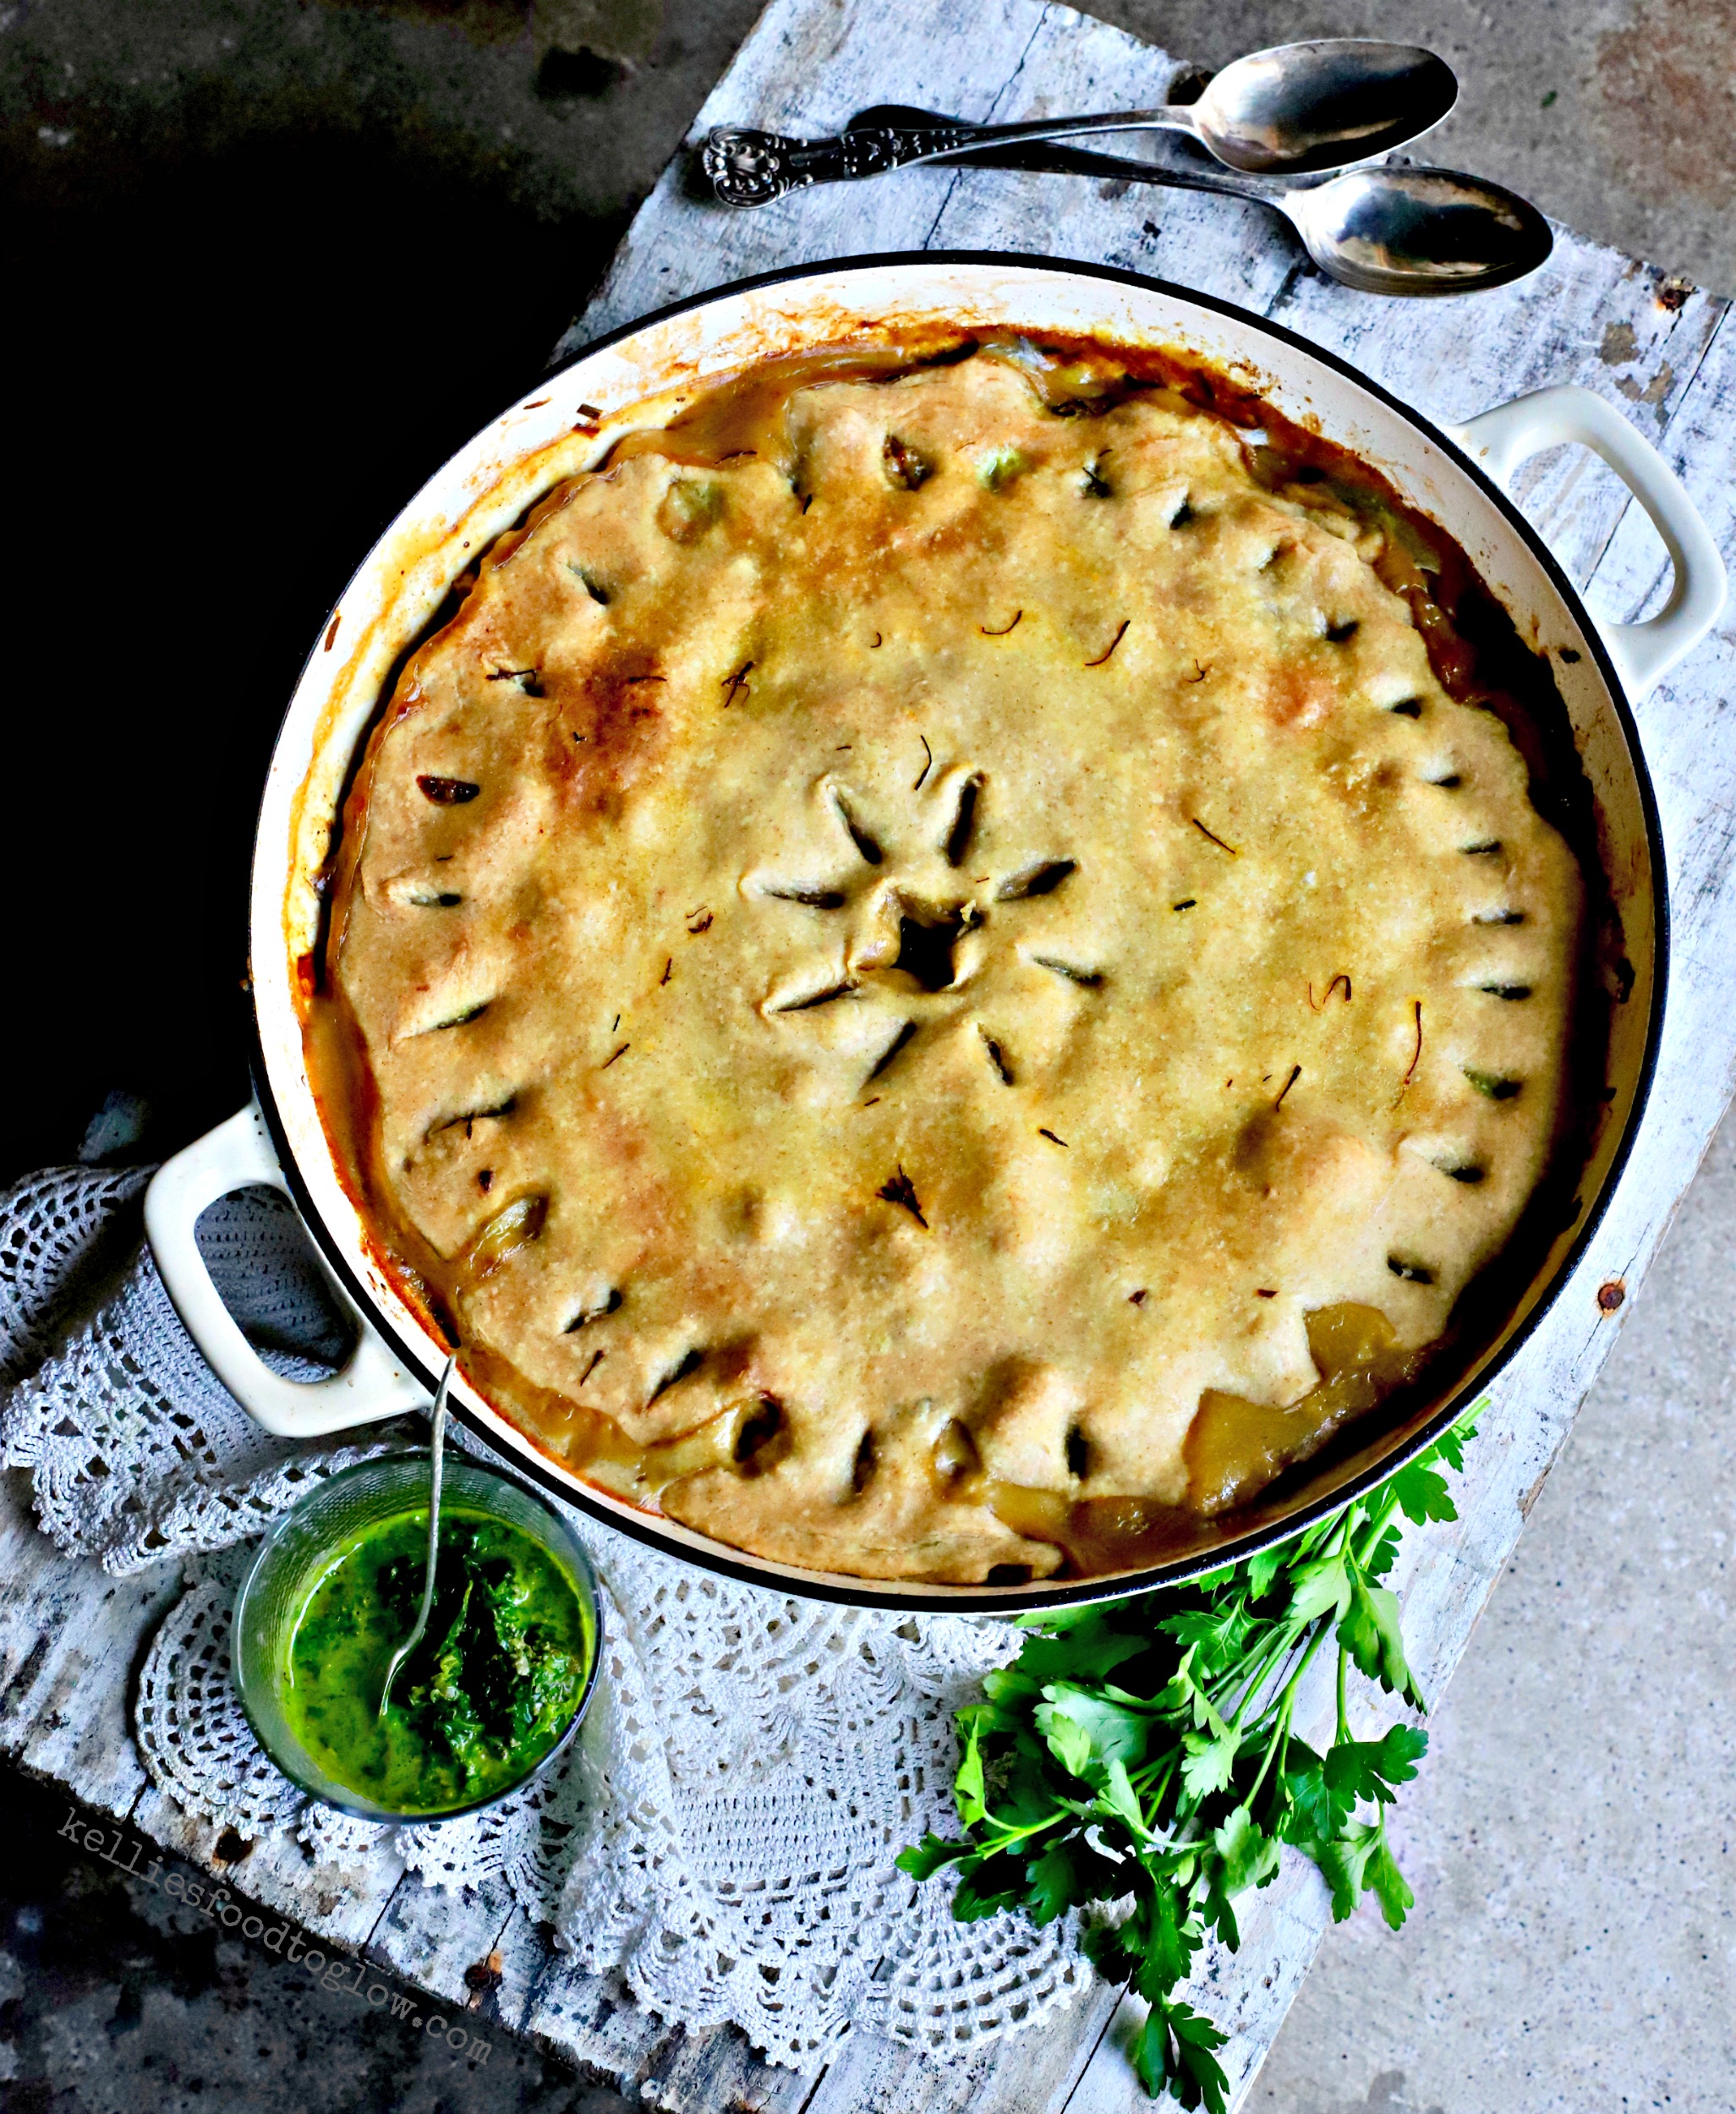 Vegetable pot pie gone a bit fancy with saffron, porcini mushrooms and an olive oil crust. This #vegan, weekend family #food #recipe will remind you of pot pies of yore, but without the saturated fat. #potpie #familyrecipe #vegetables #vegetarian #baking